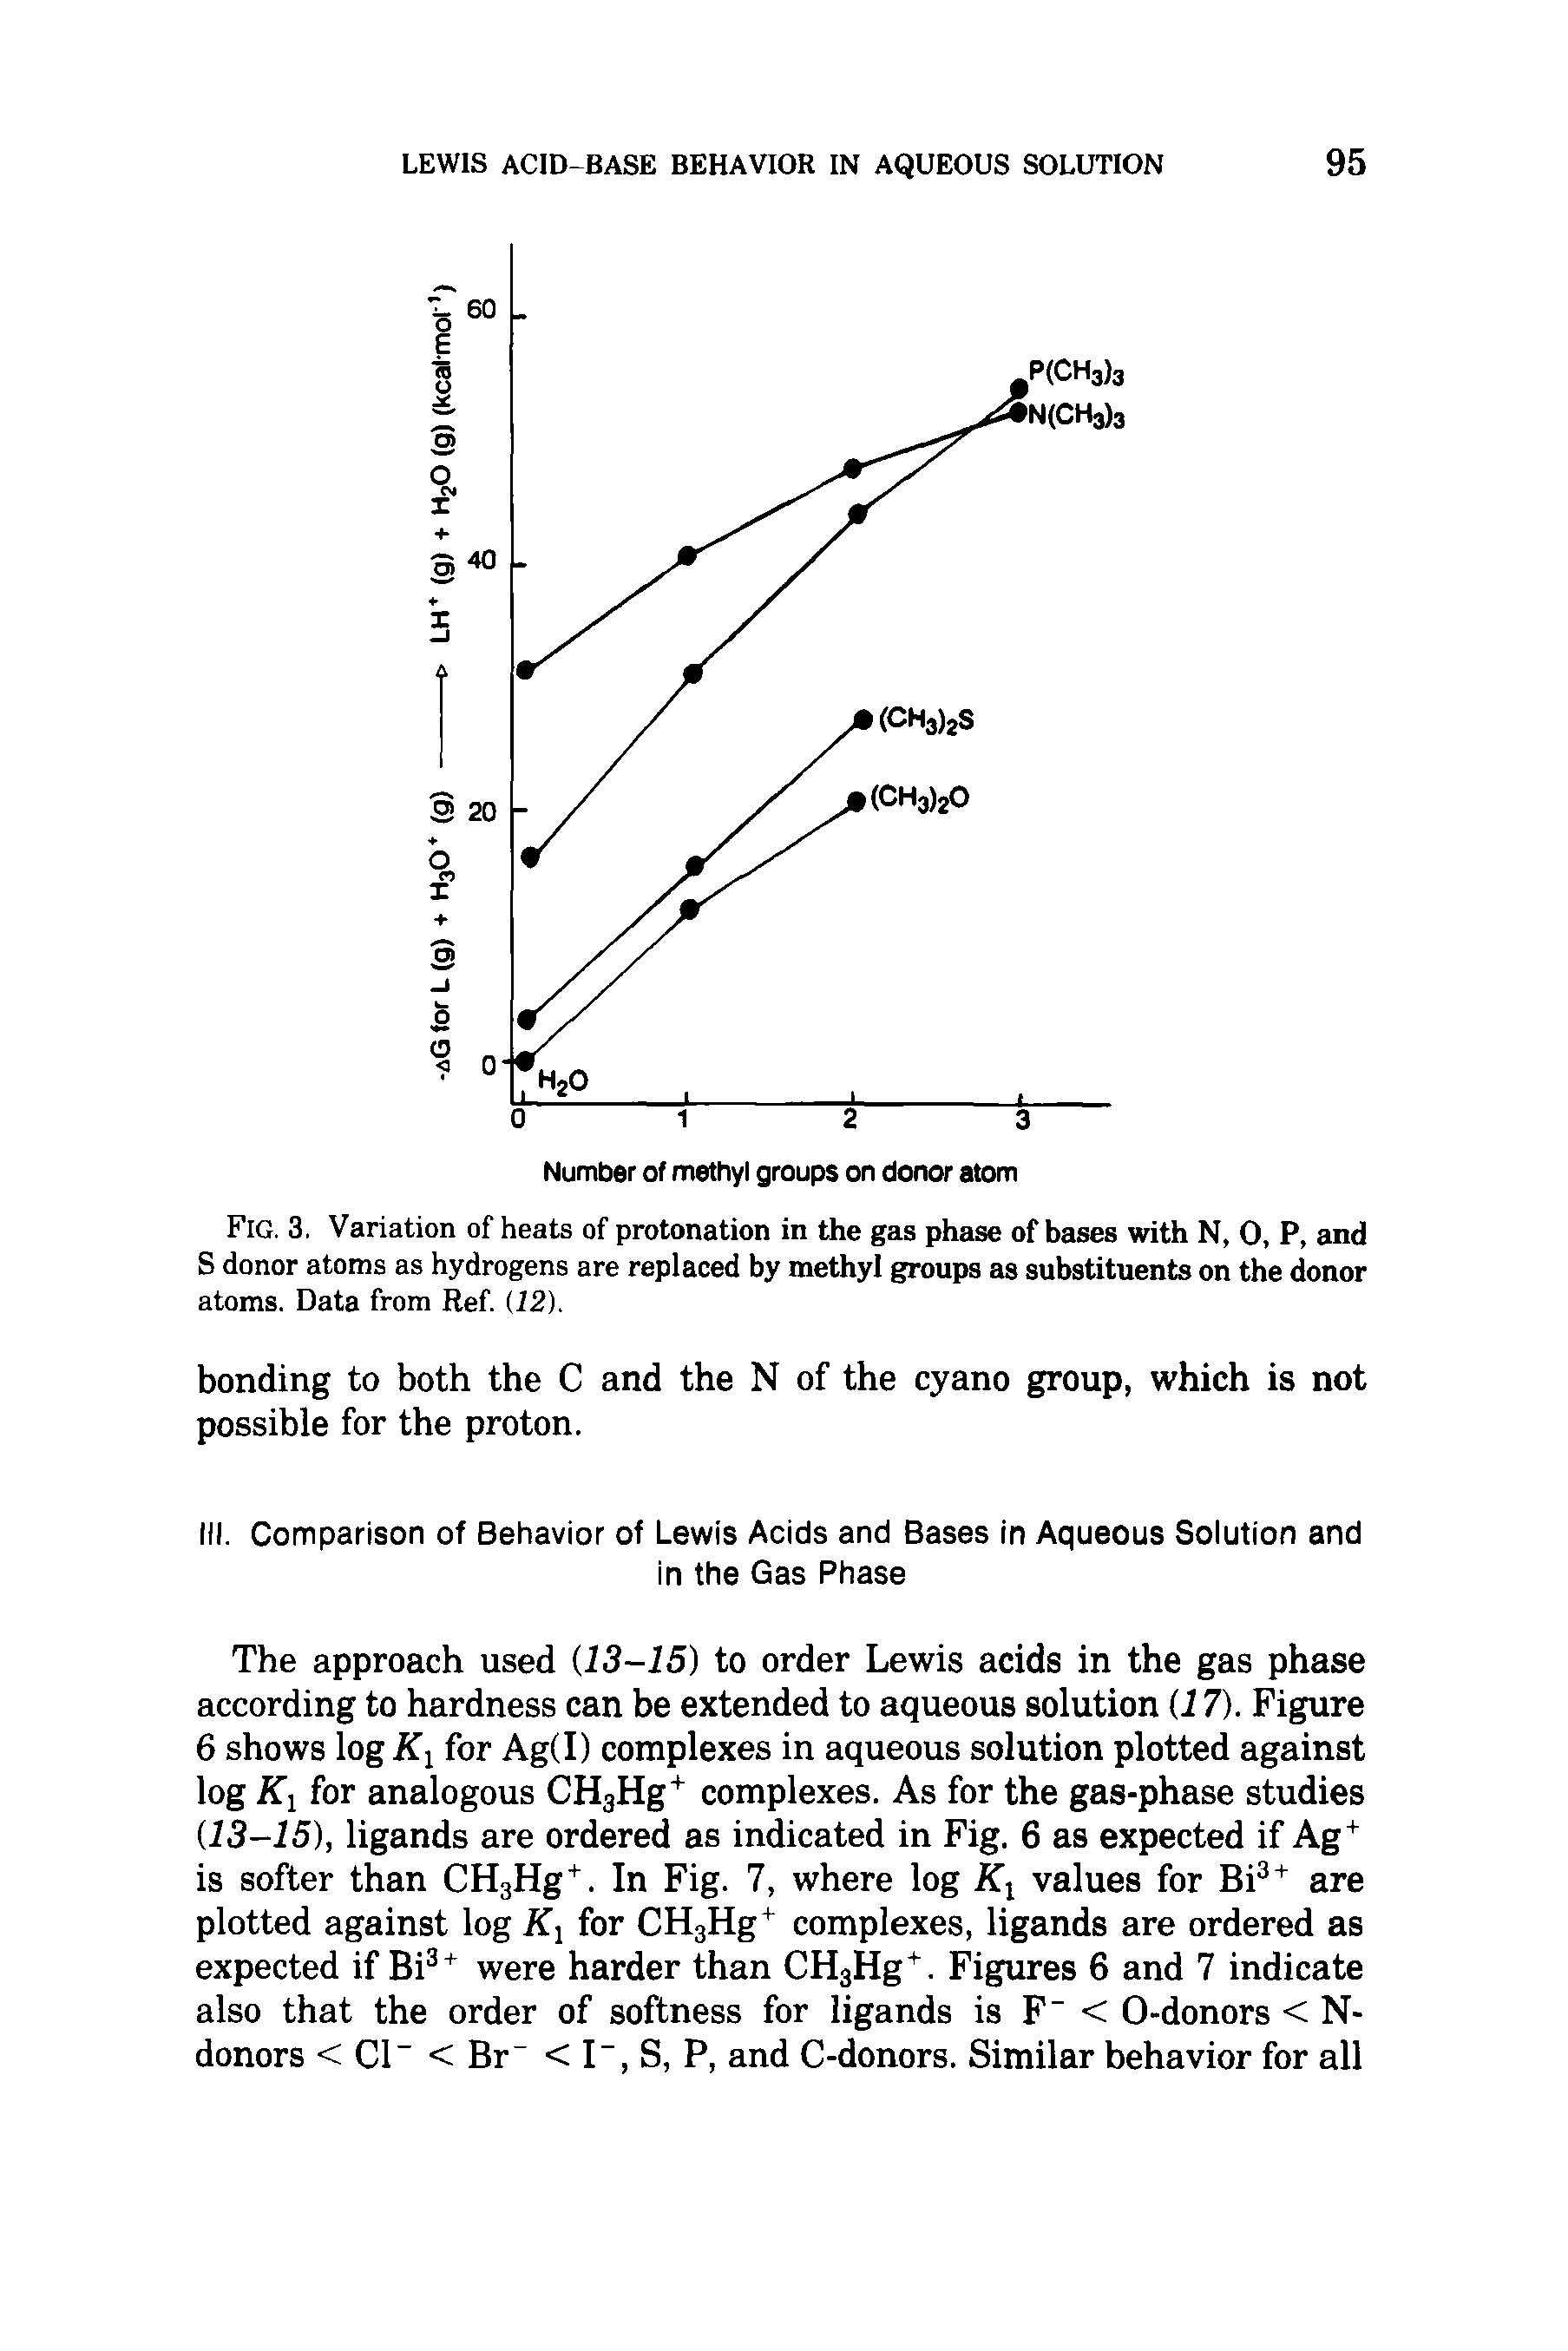 Fig. 3. Variation of heats of protonation in the gas phase of bases with N, 0, P, and S donor atoms as hydrogens are replaced by methyl groups as substituents on the donor atoms. Data from Ref. (12).